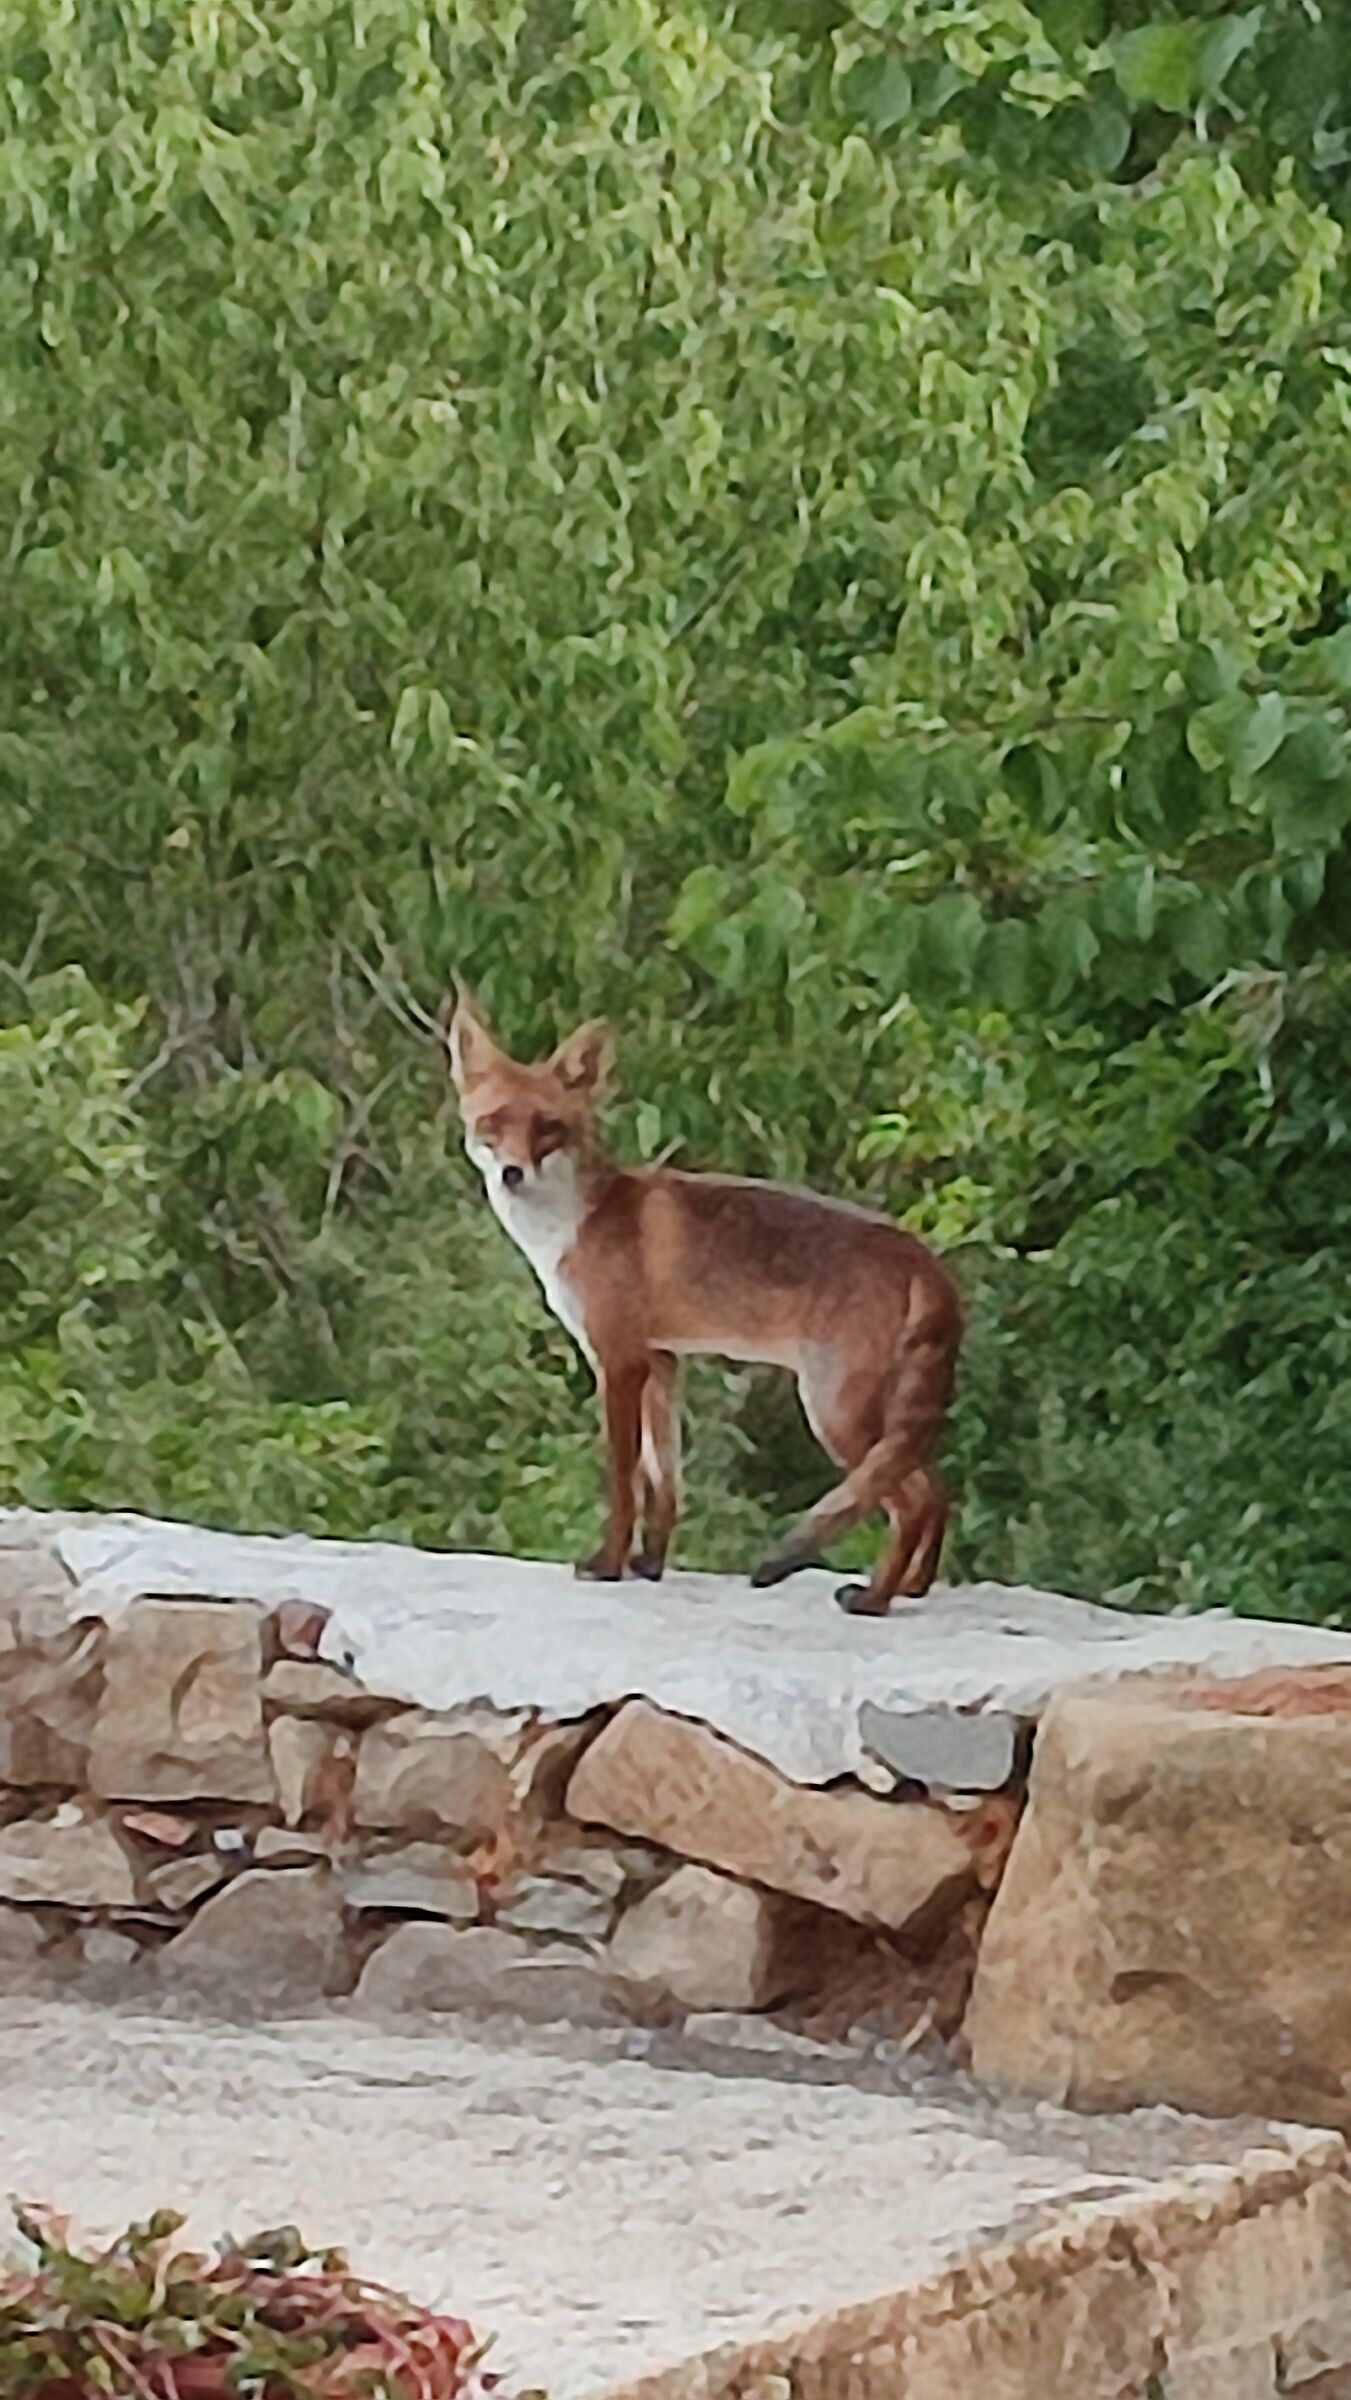 A fox came to see me...